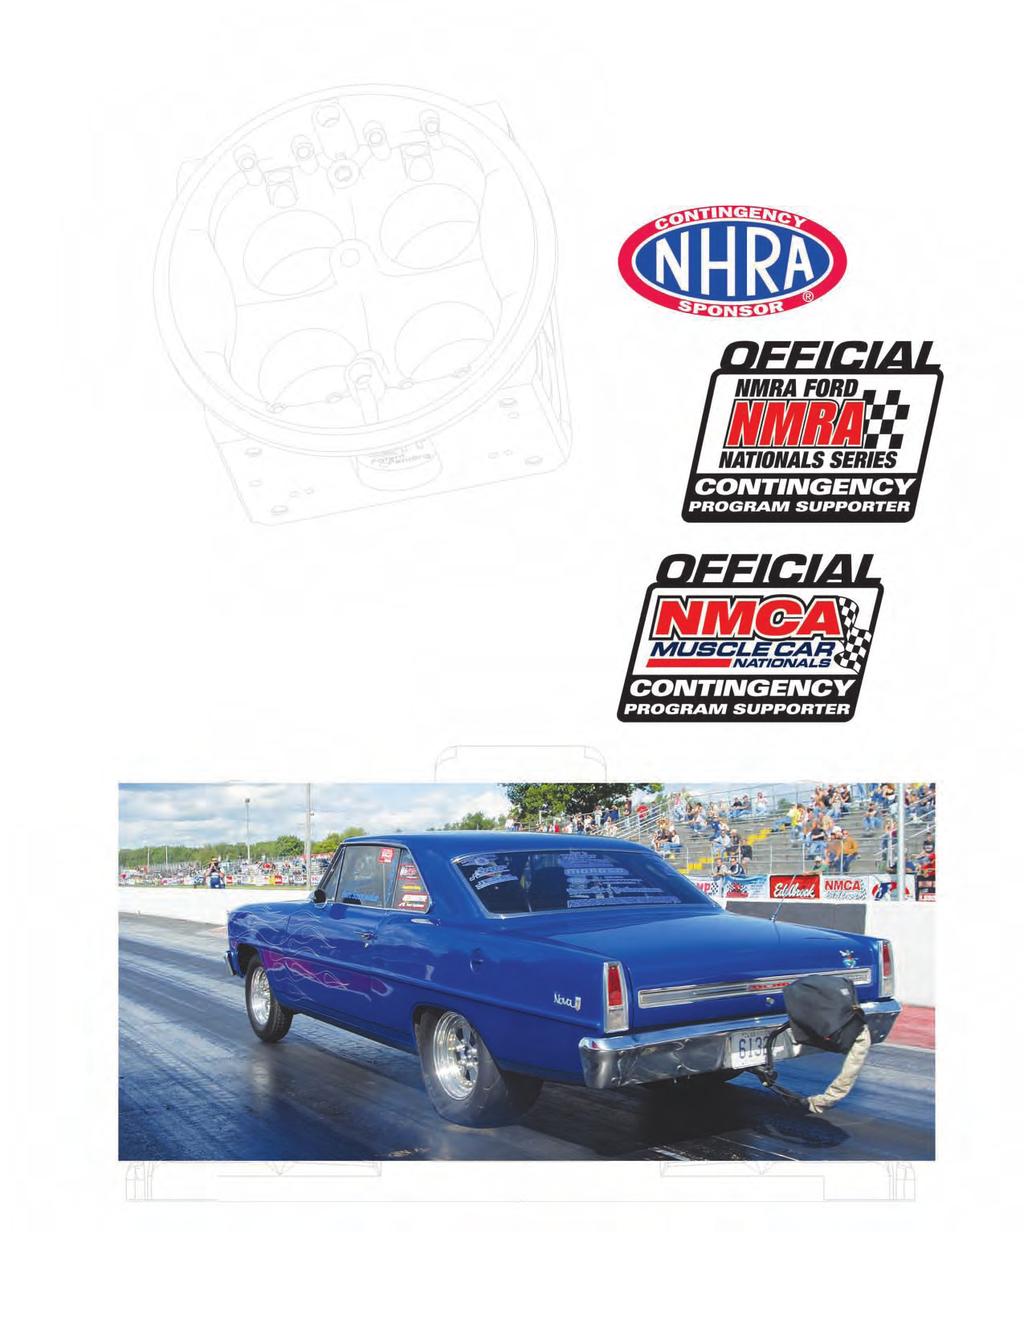 Racer Contingency Programs Quick Fuel Technology is proud of our continuing racer support programs, in specific, our contingency partner programs with the National Hot Rod Association, National